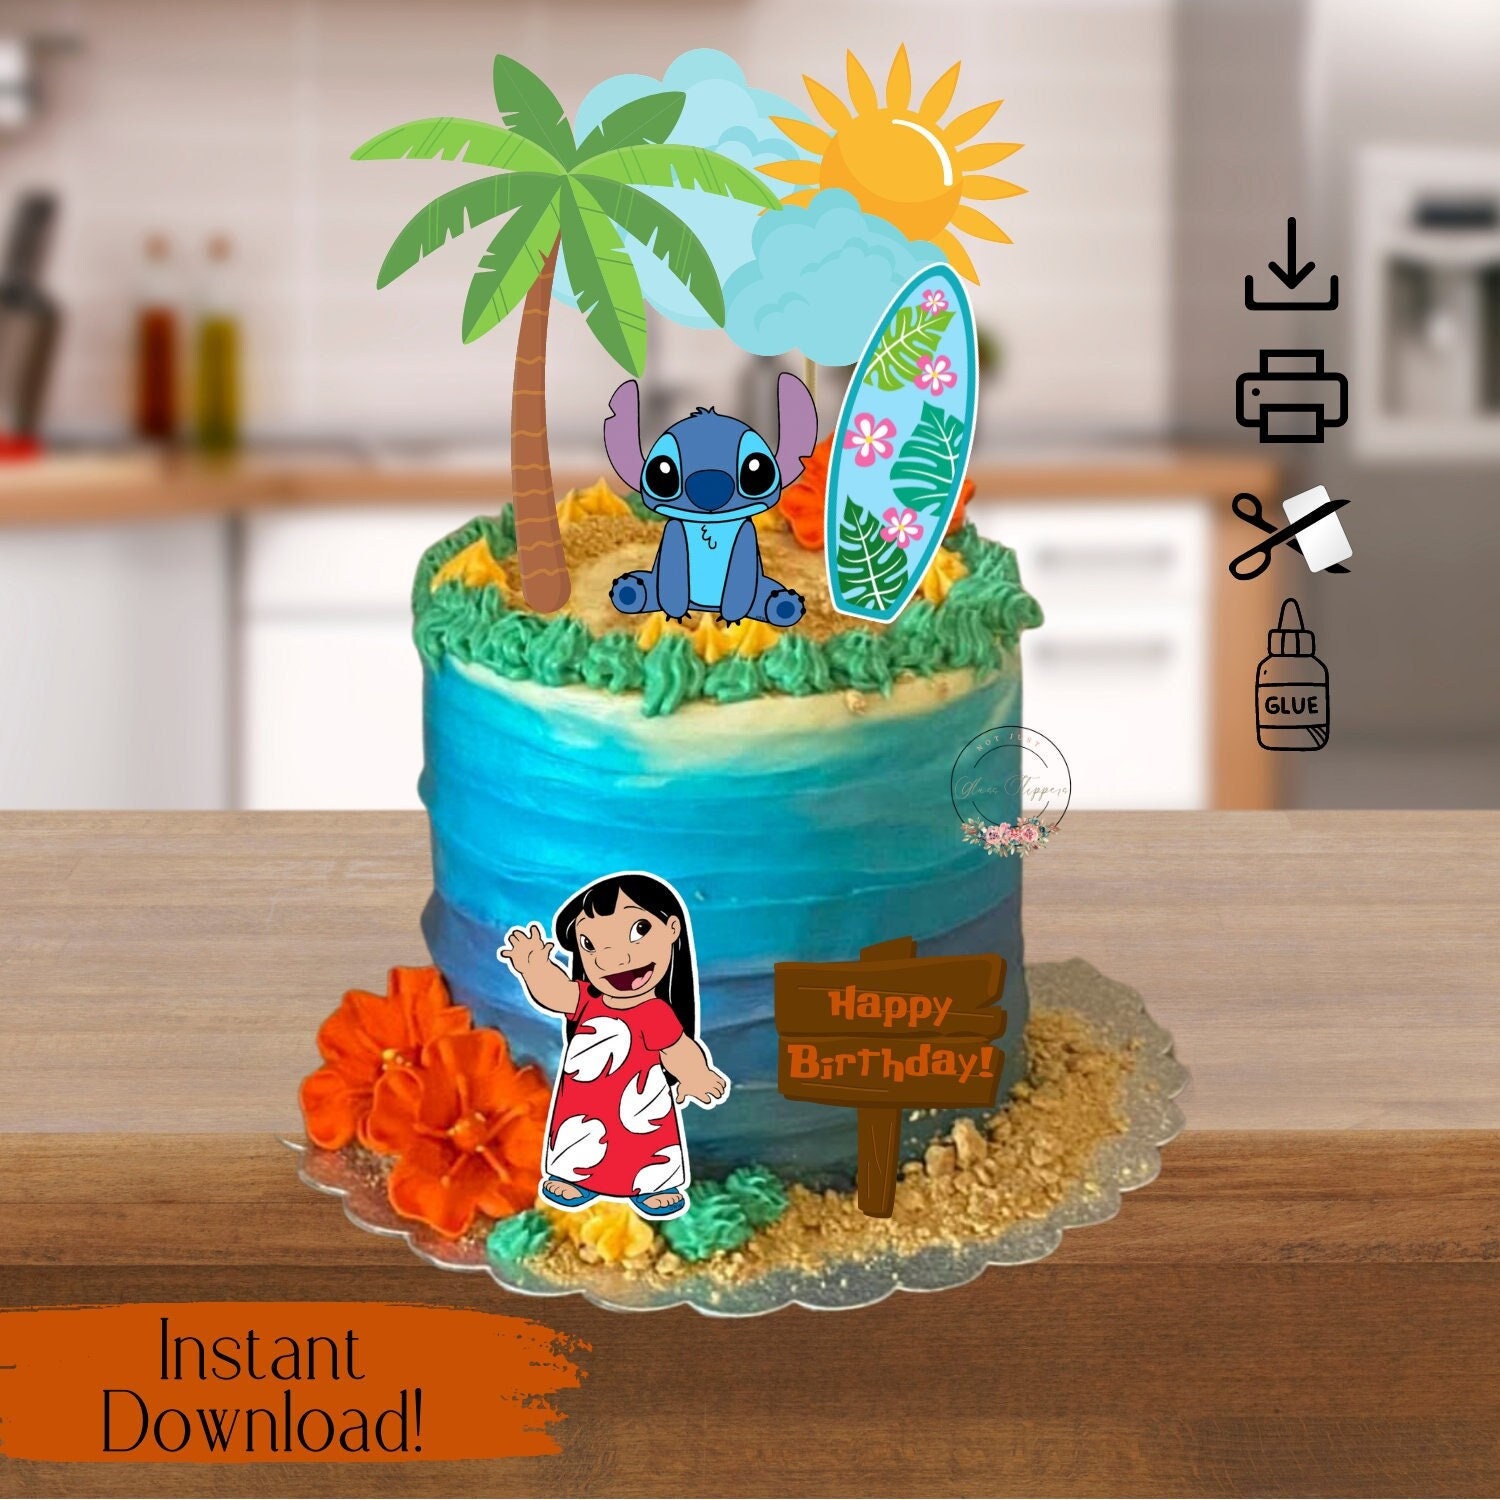 Stitch pittore Cake topper - Decorated Cake by Arianna - CakesDecor